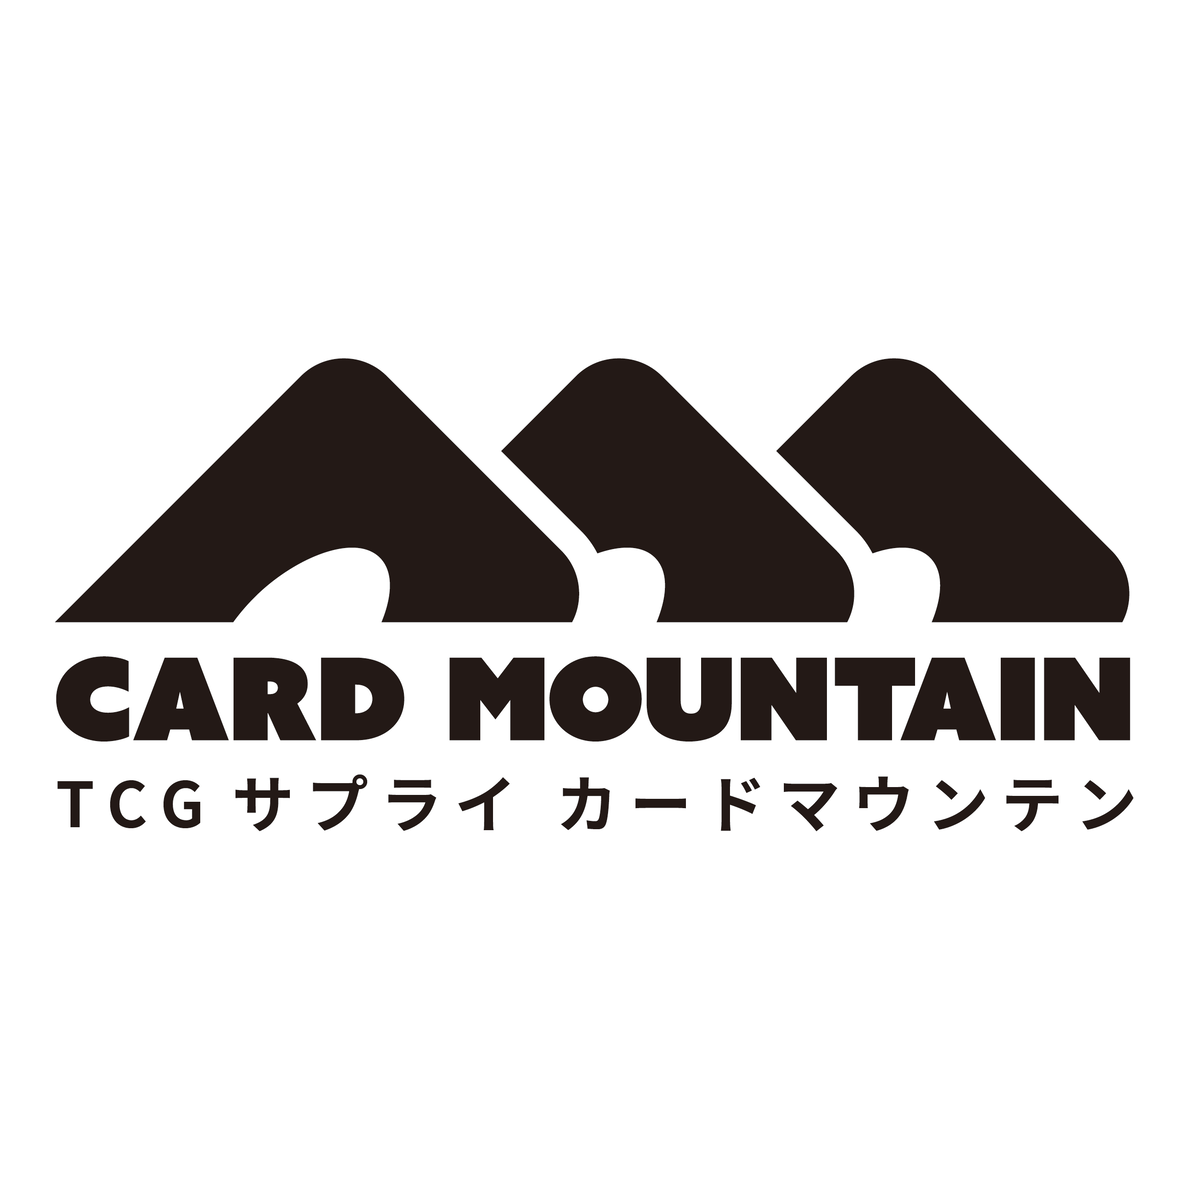 About カードマウンテン Card Mountain